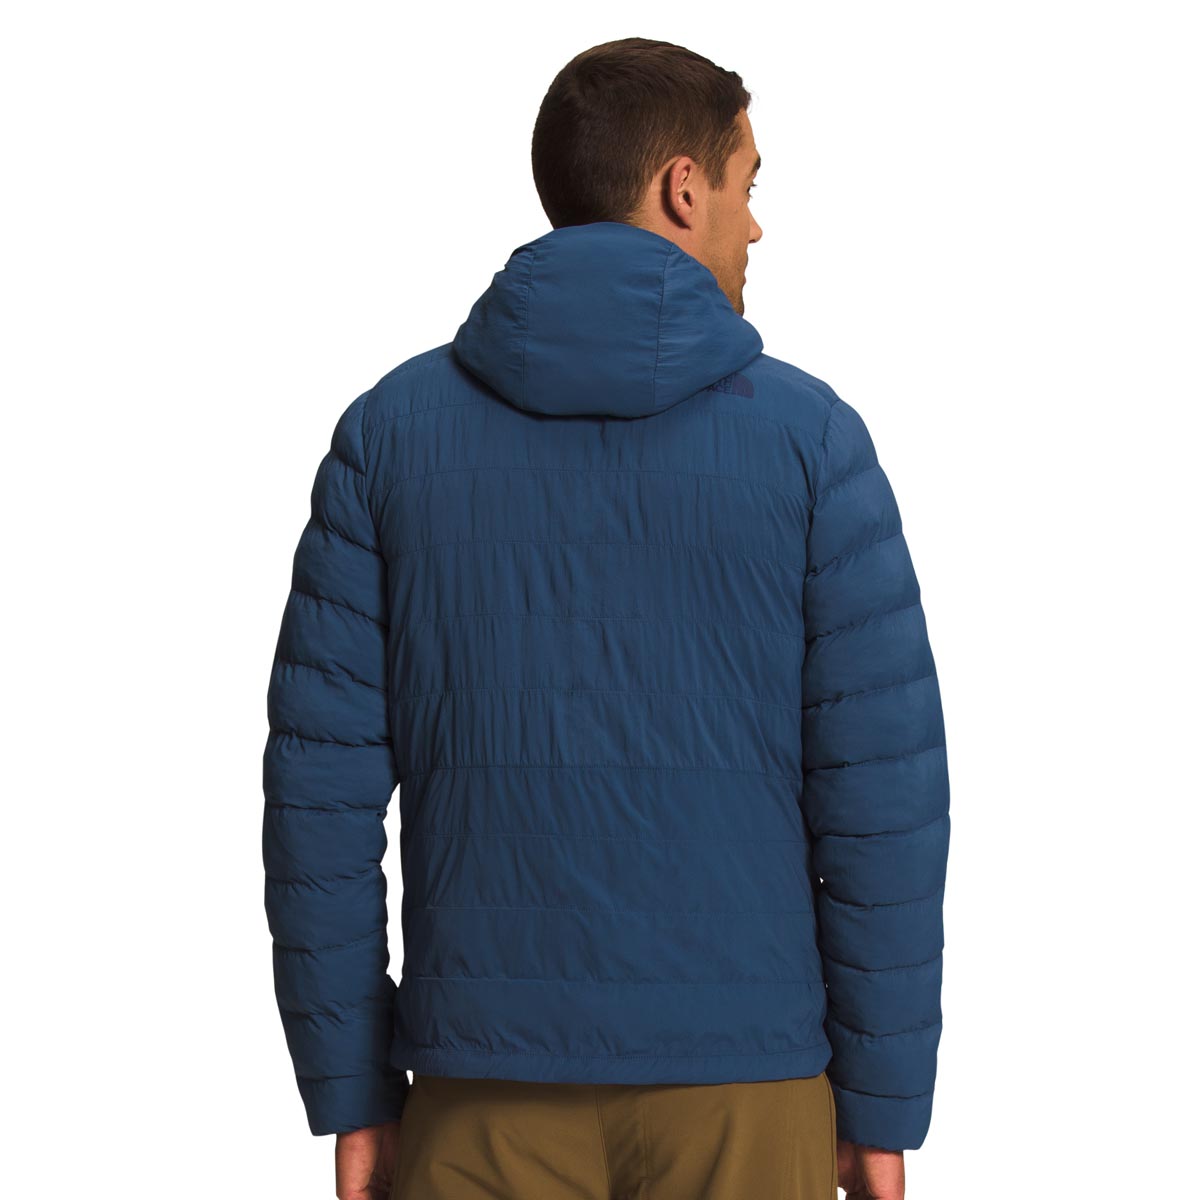 The North Face Men's ThermoBall 50/50 Jacket